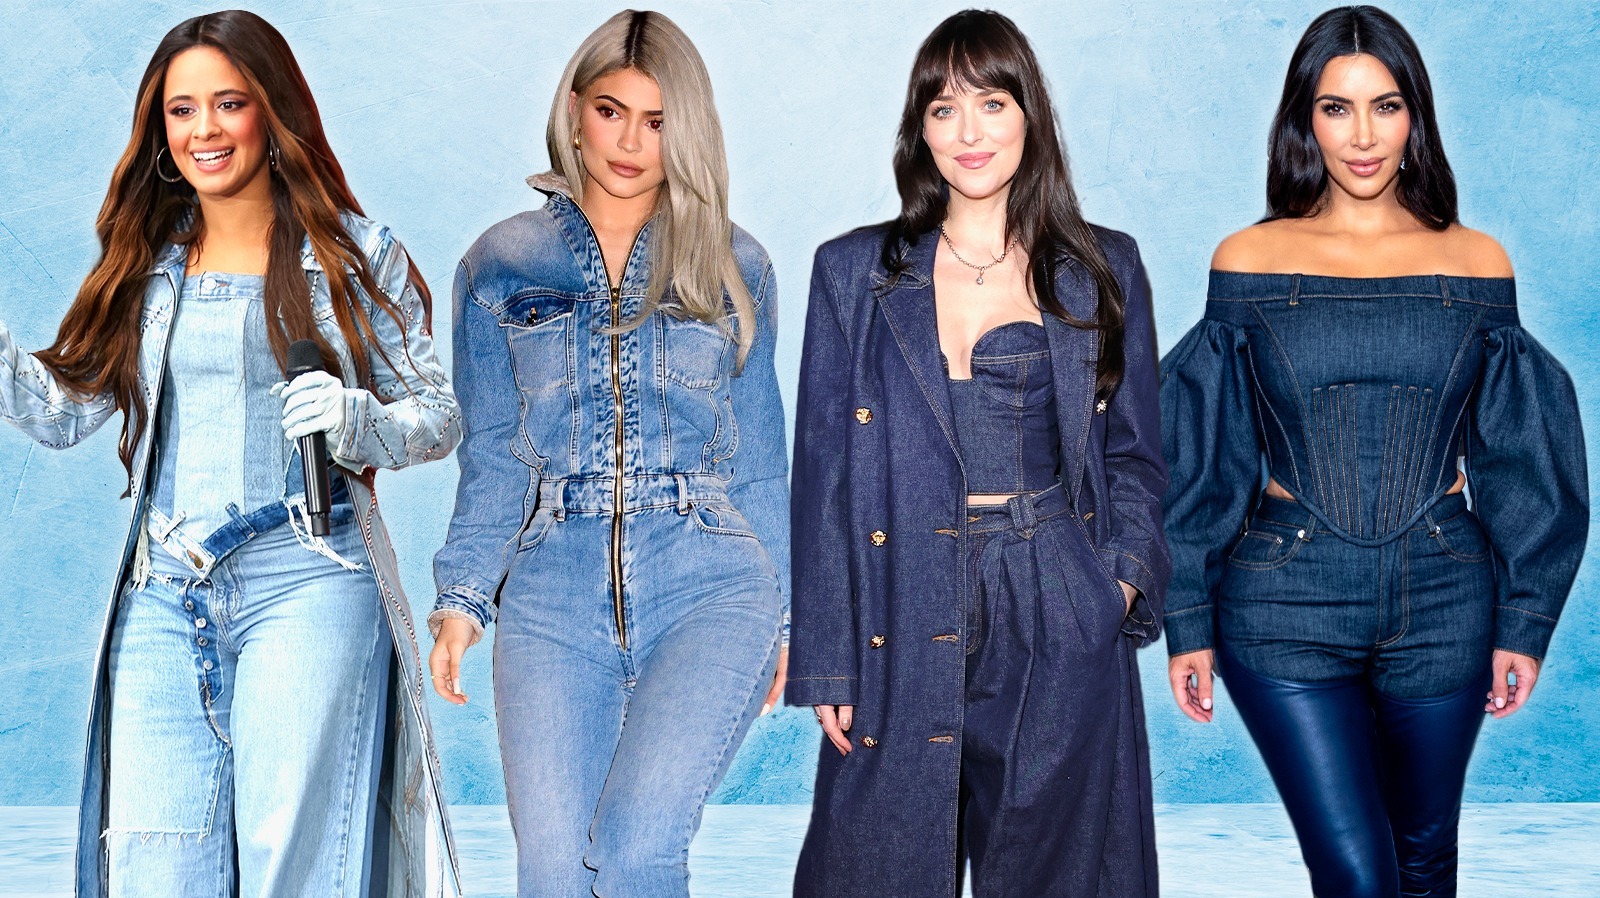 Kylie Jenner Fashion And Outfits: From Double Denim to Booty Shorts